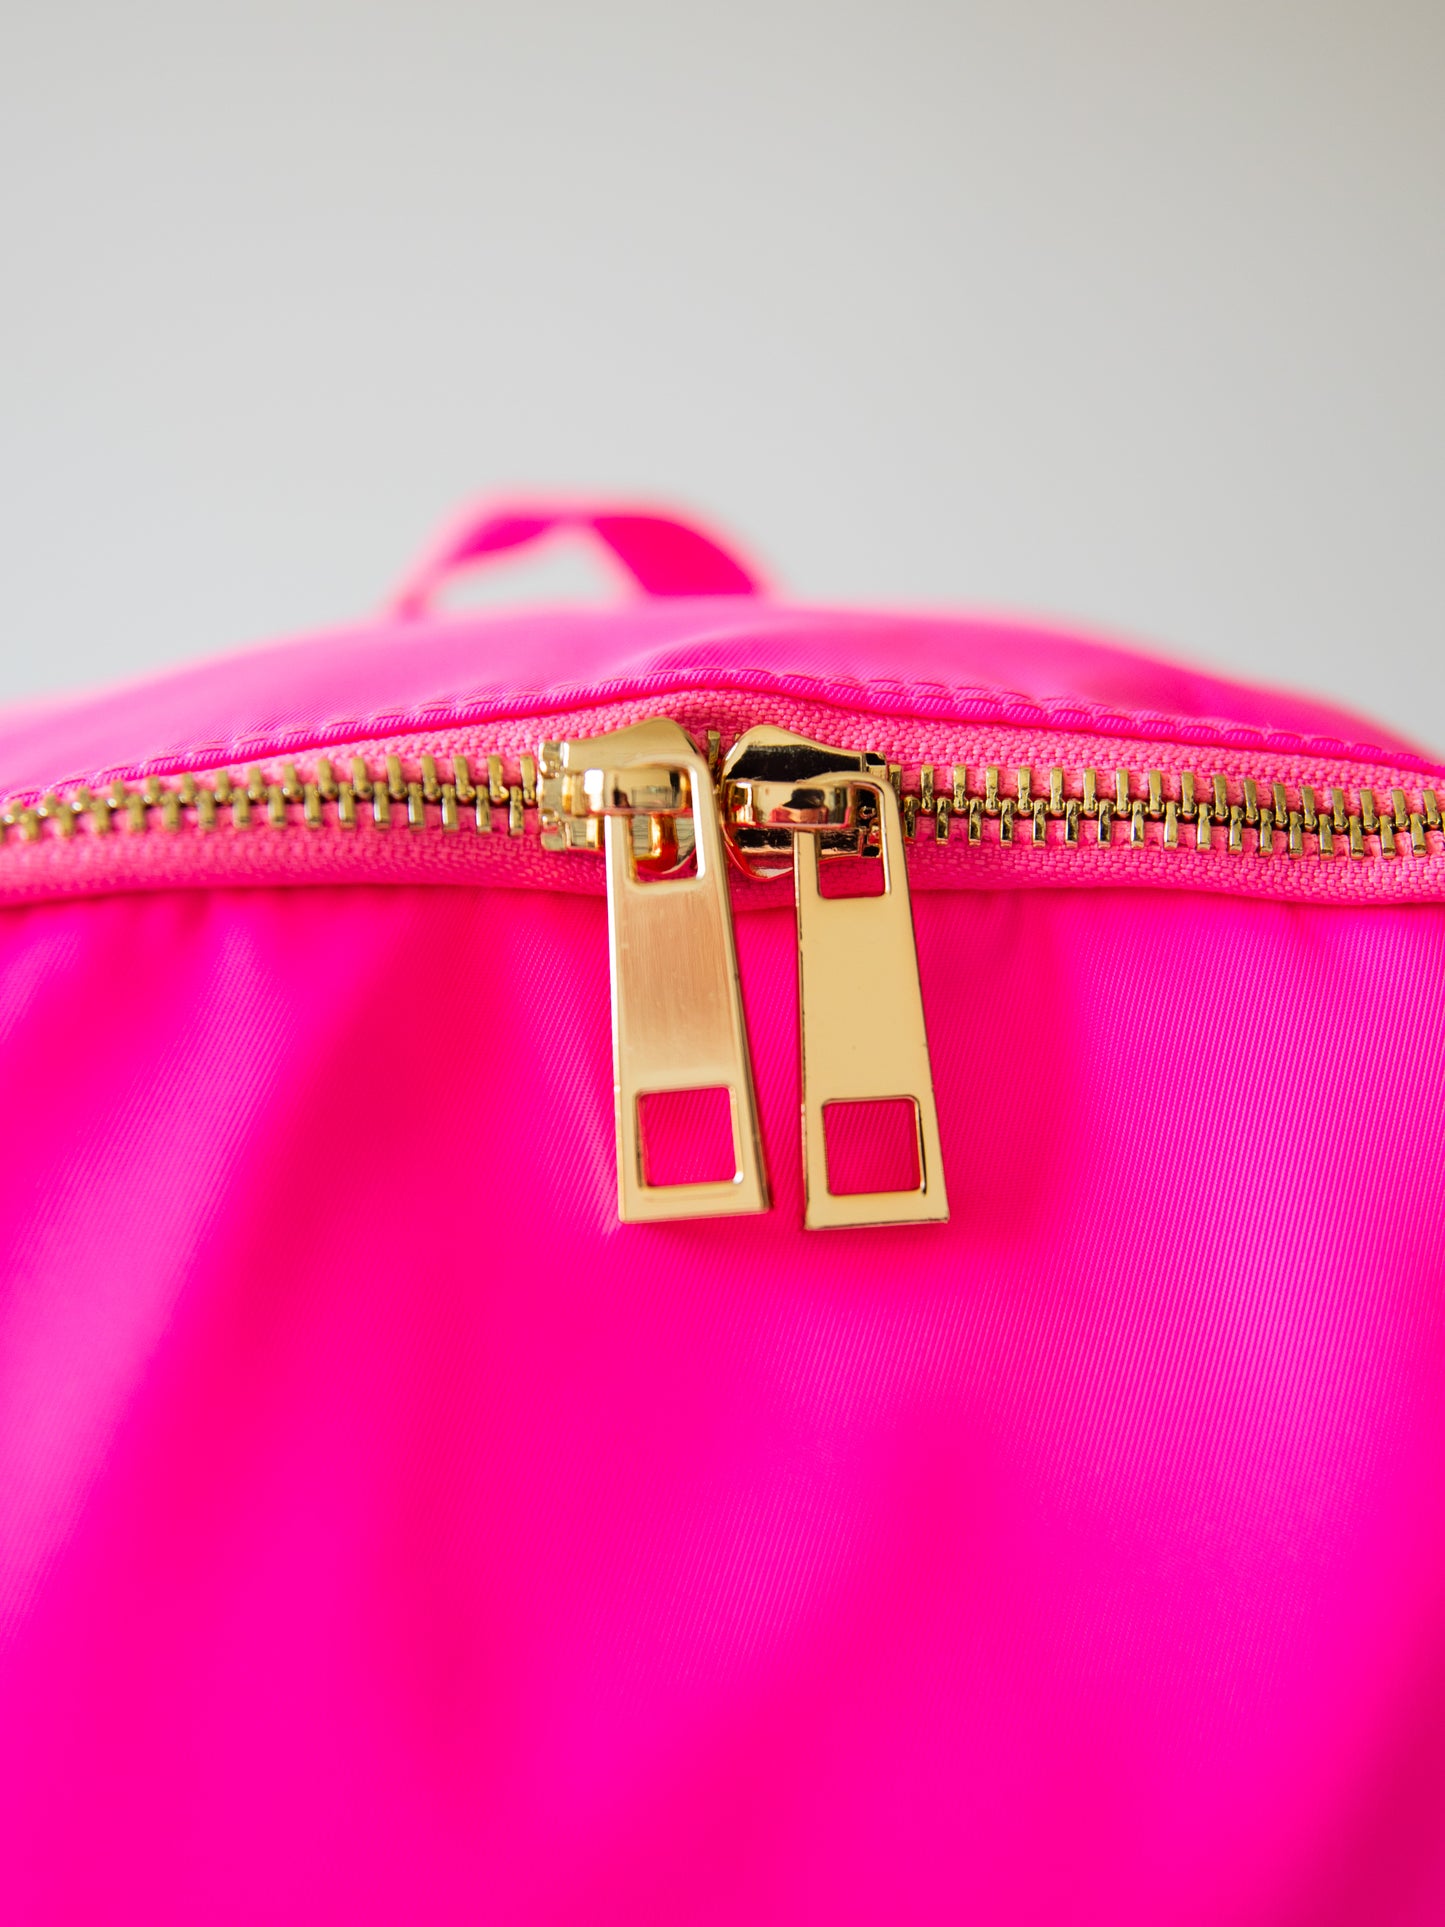 Retro Backpack - Vibrant Pink